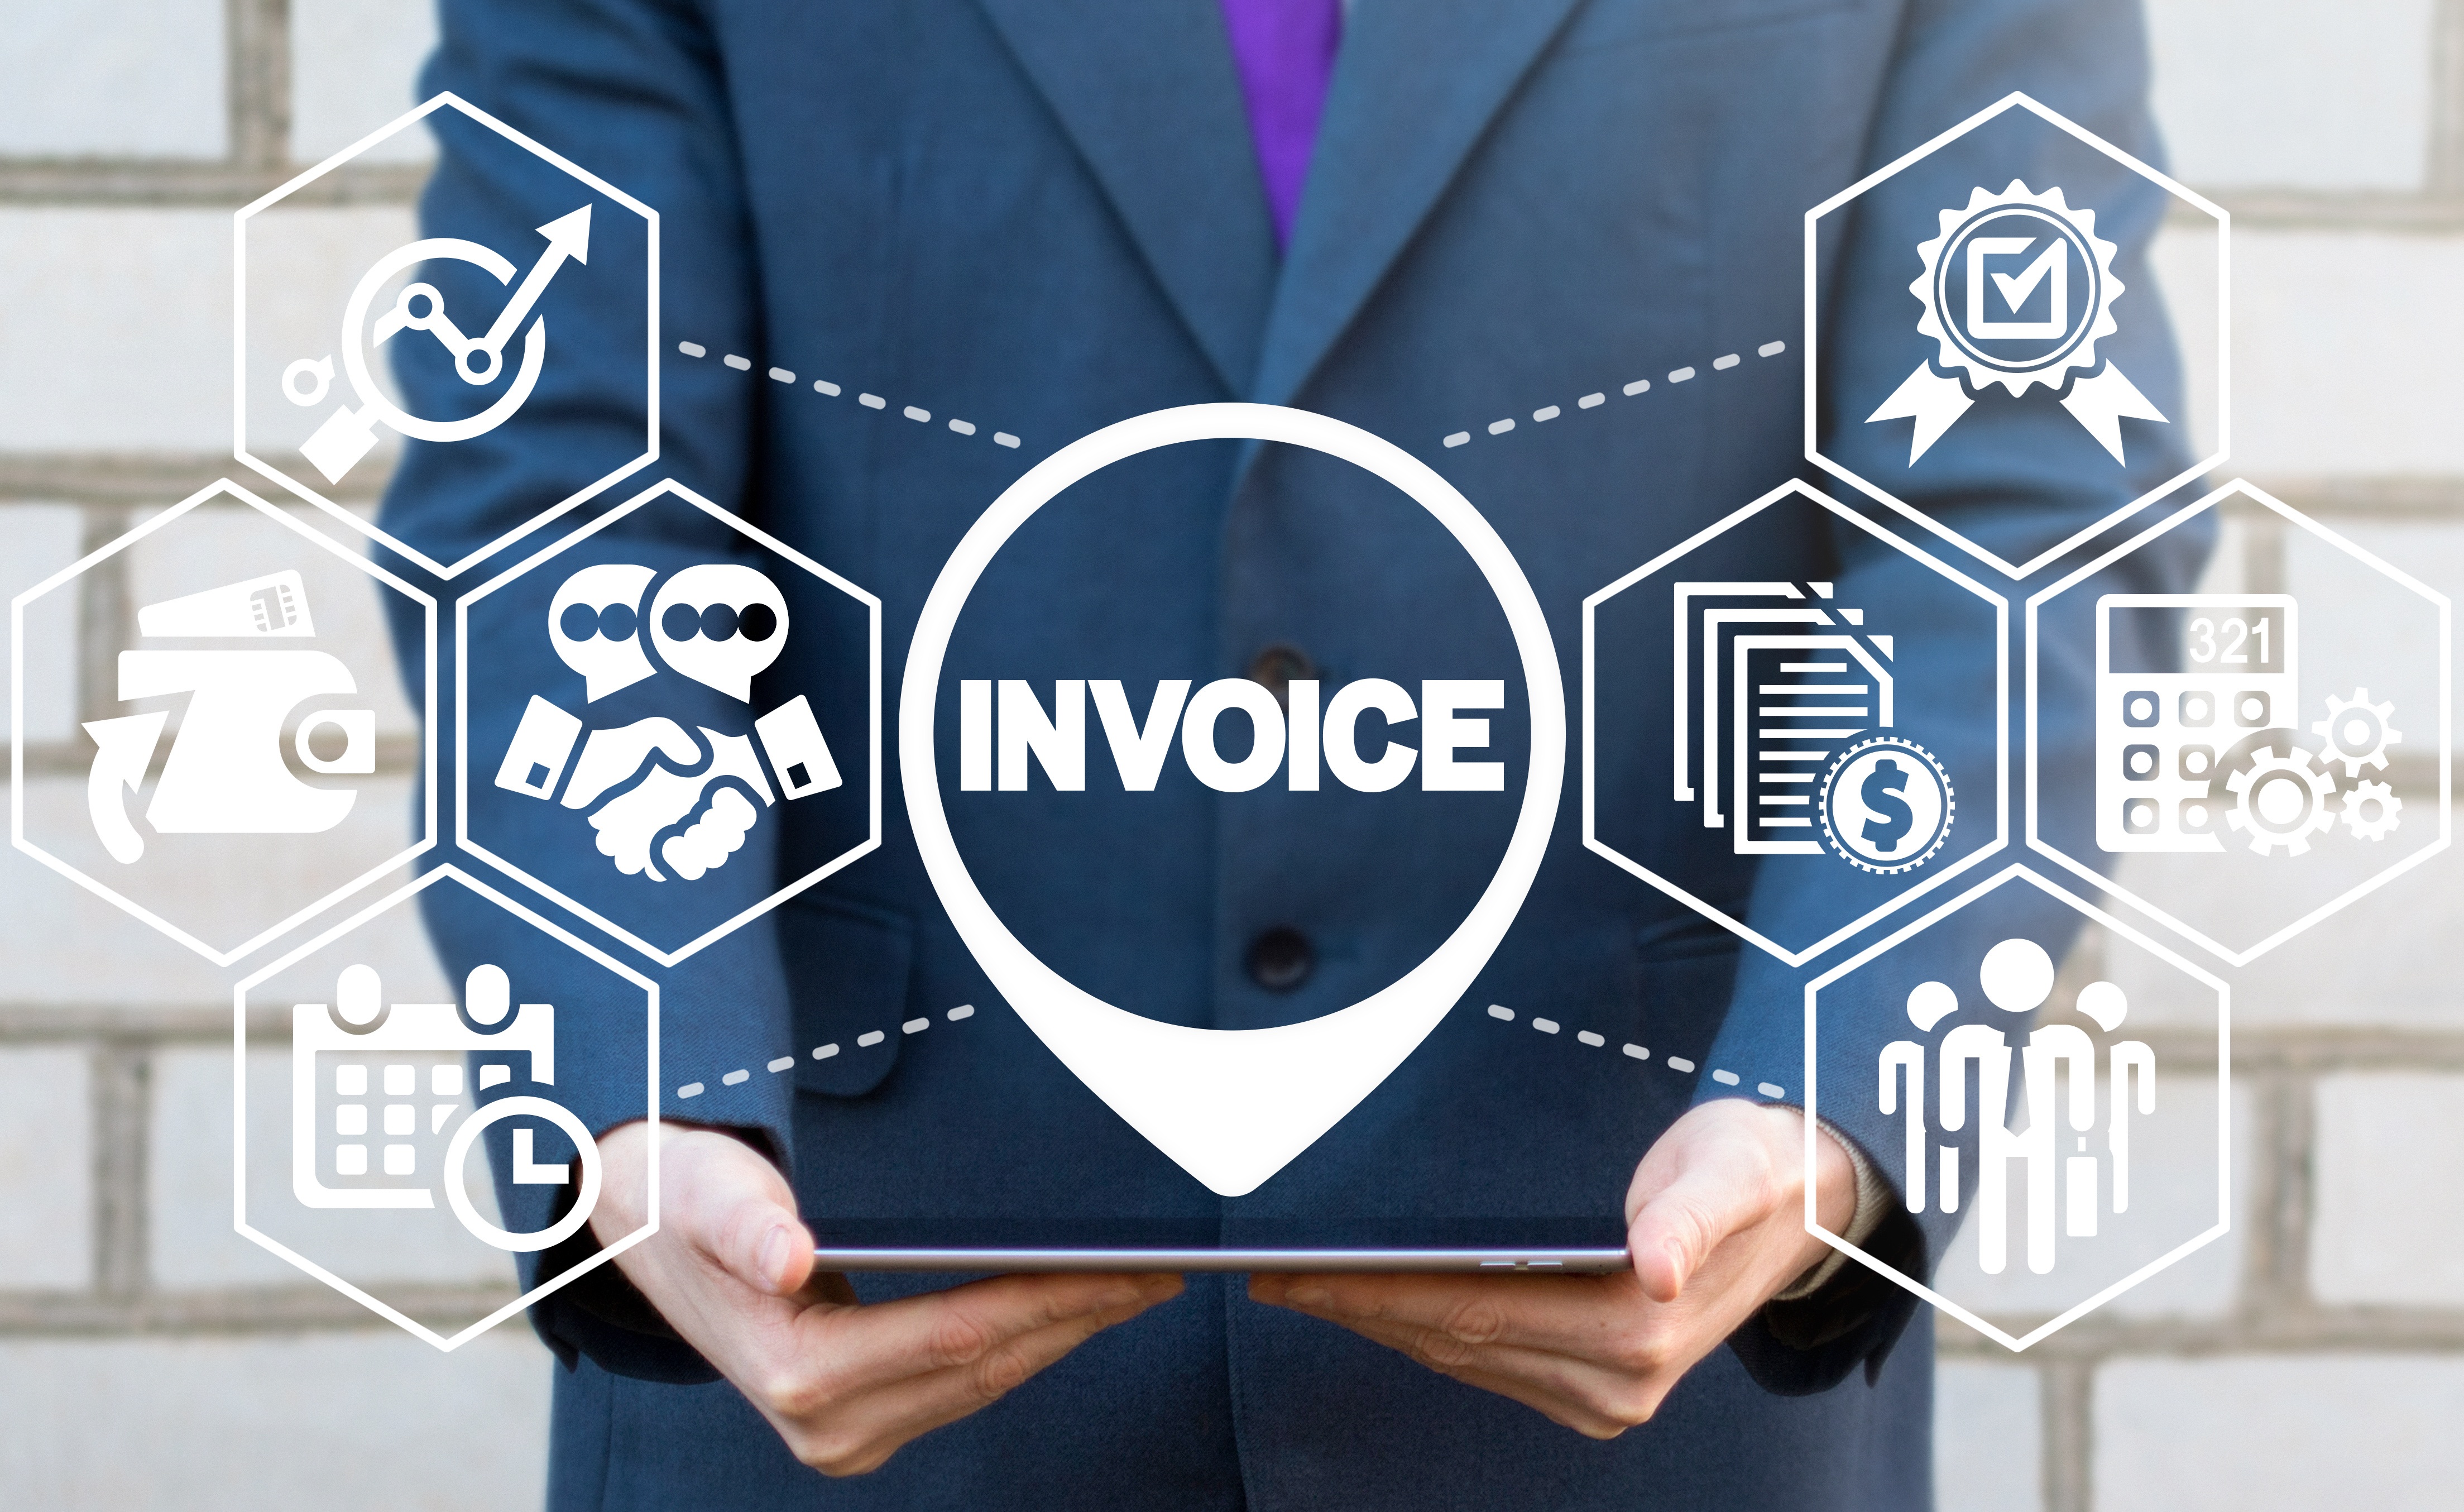 How does invoice processing automation save time and money?